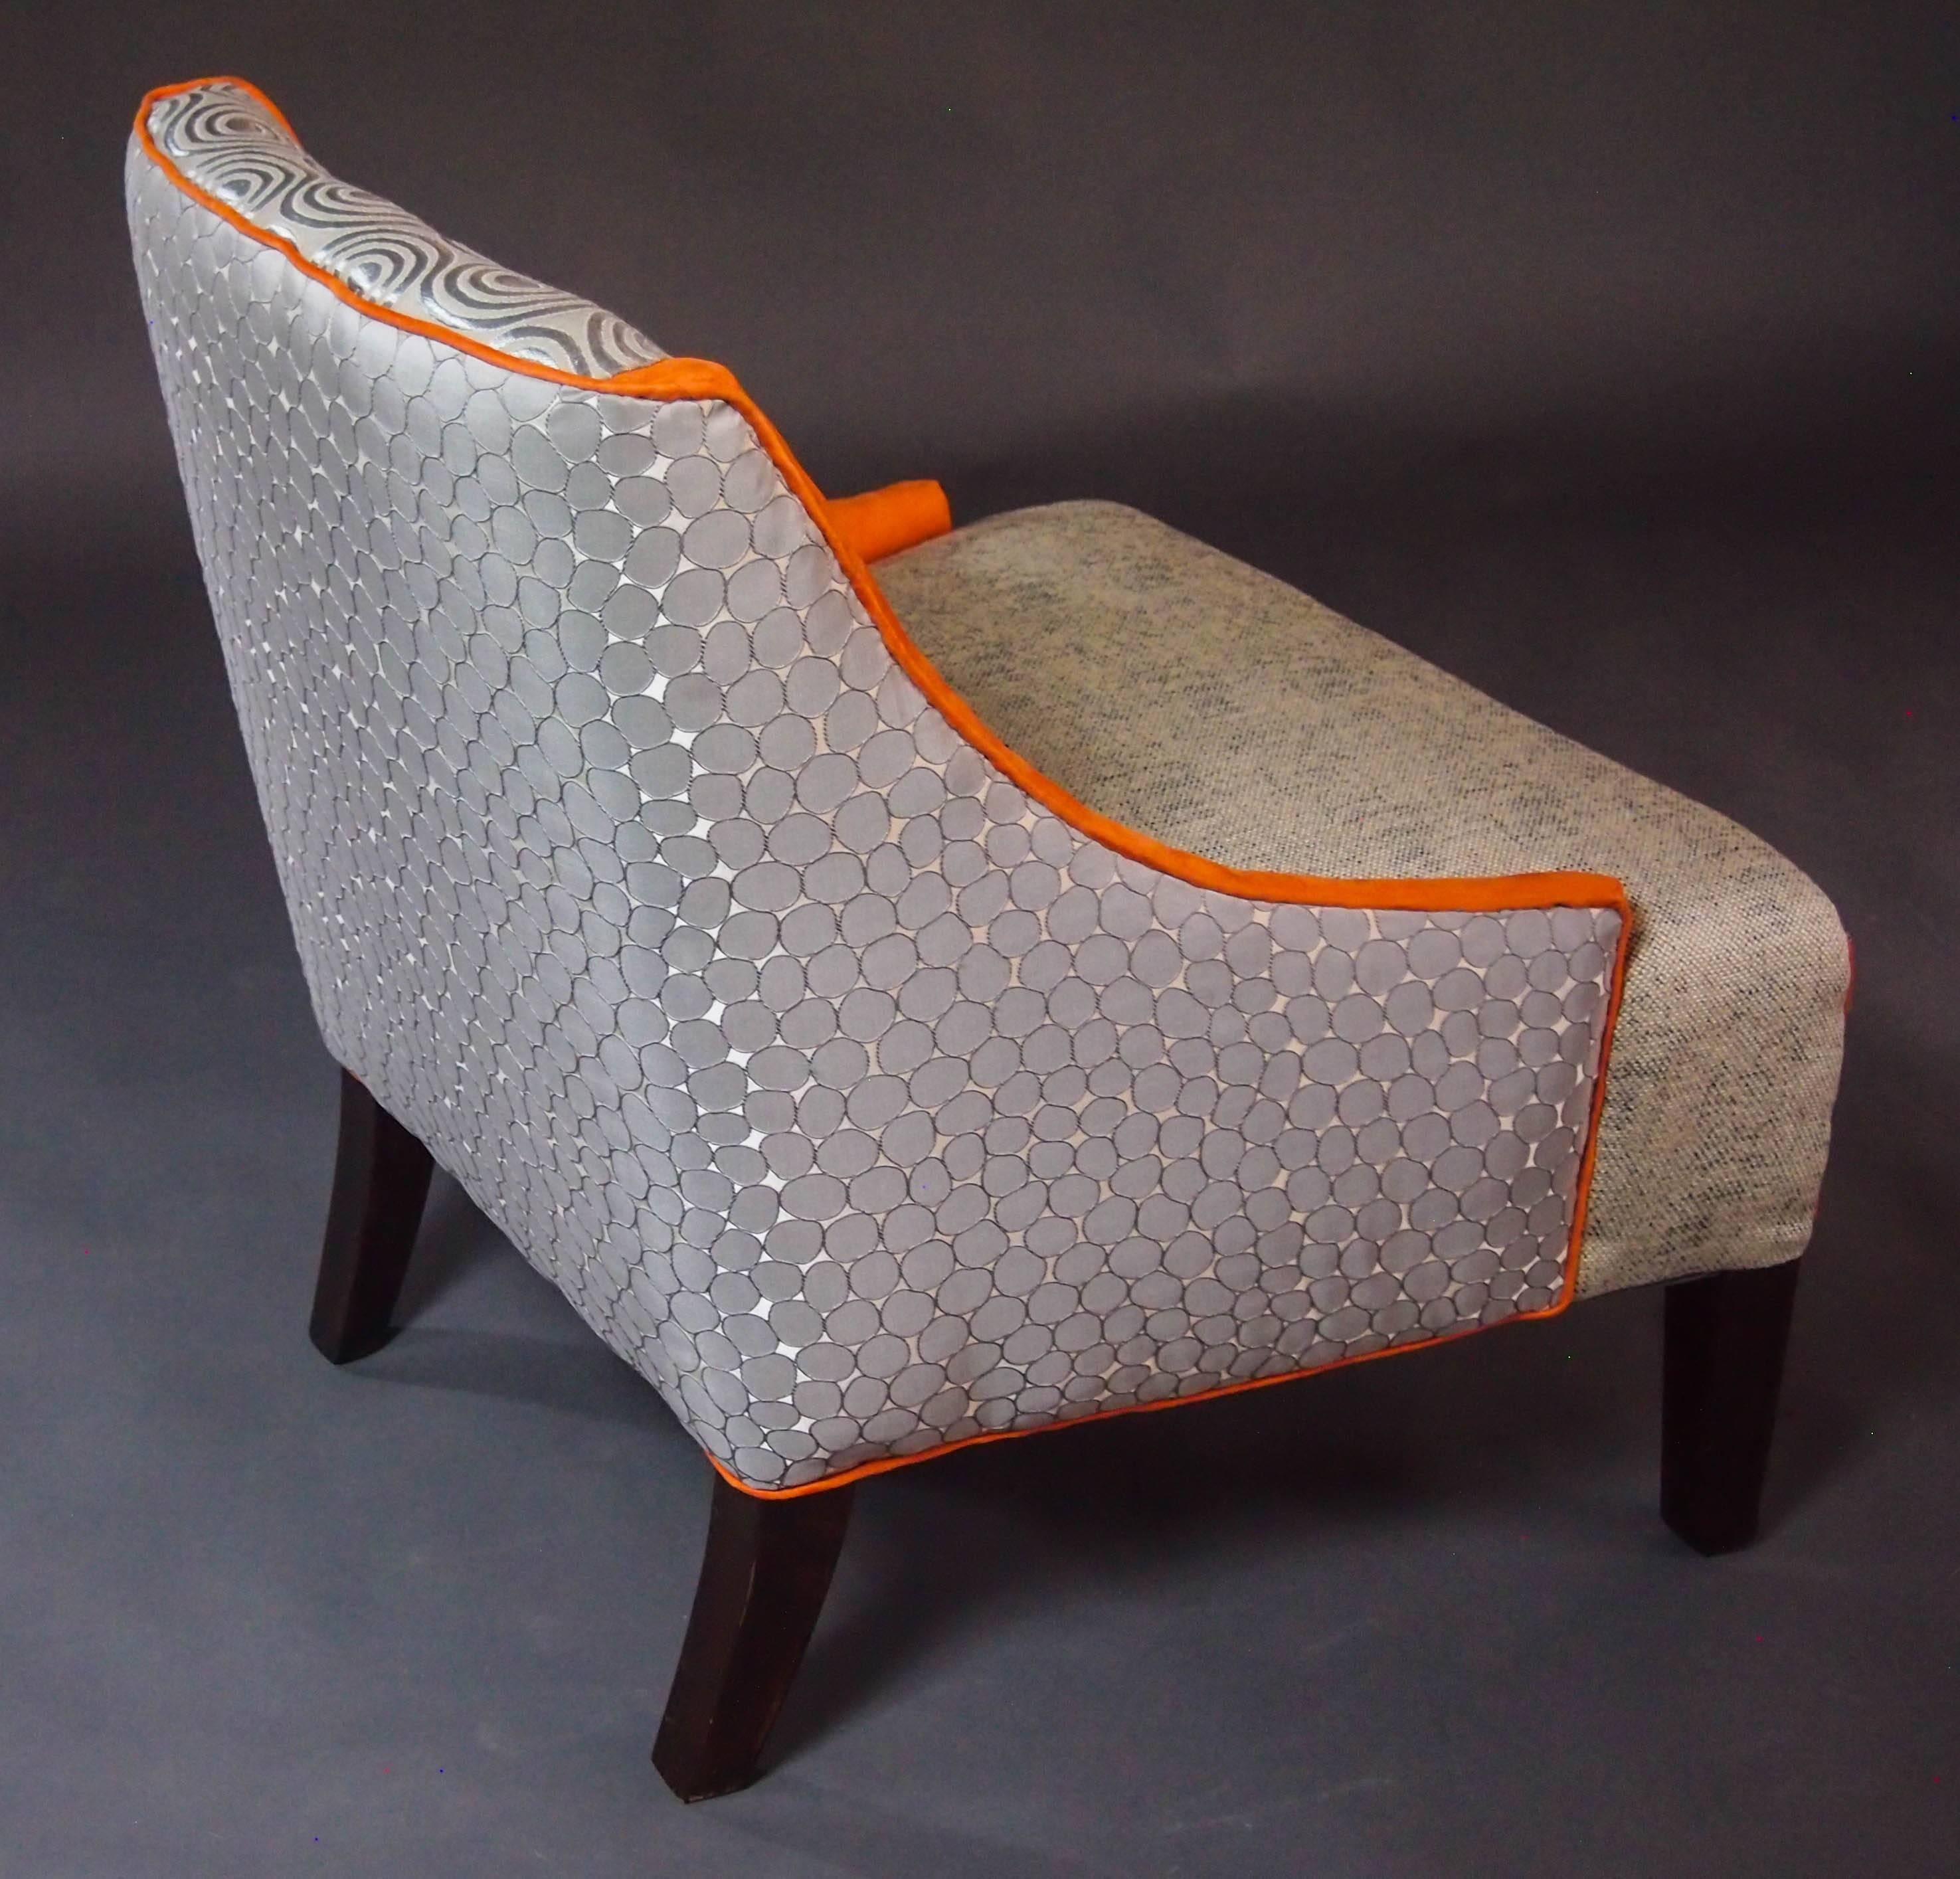 20th Century Mid-Century Lounge Chair, Hollywood Regency Style in Tan, White, Orange-in stock For Sale